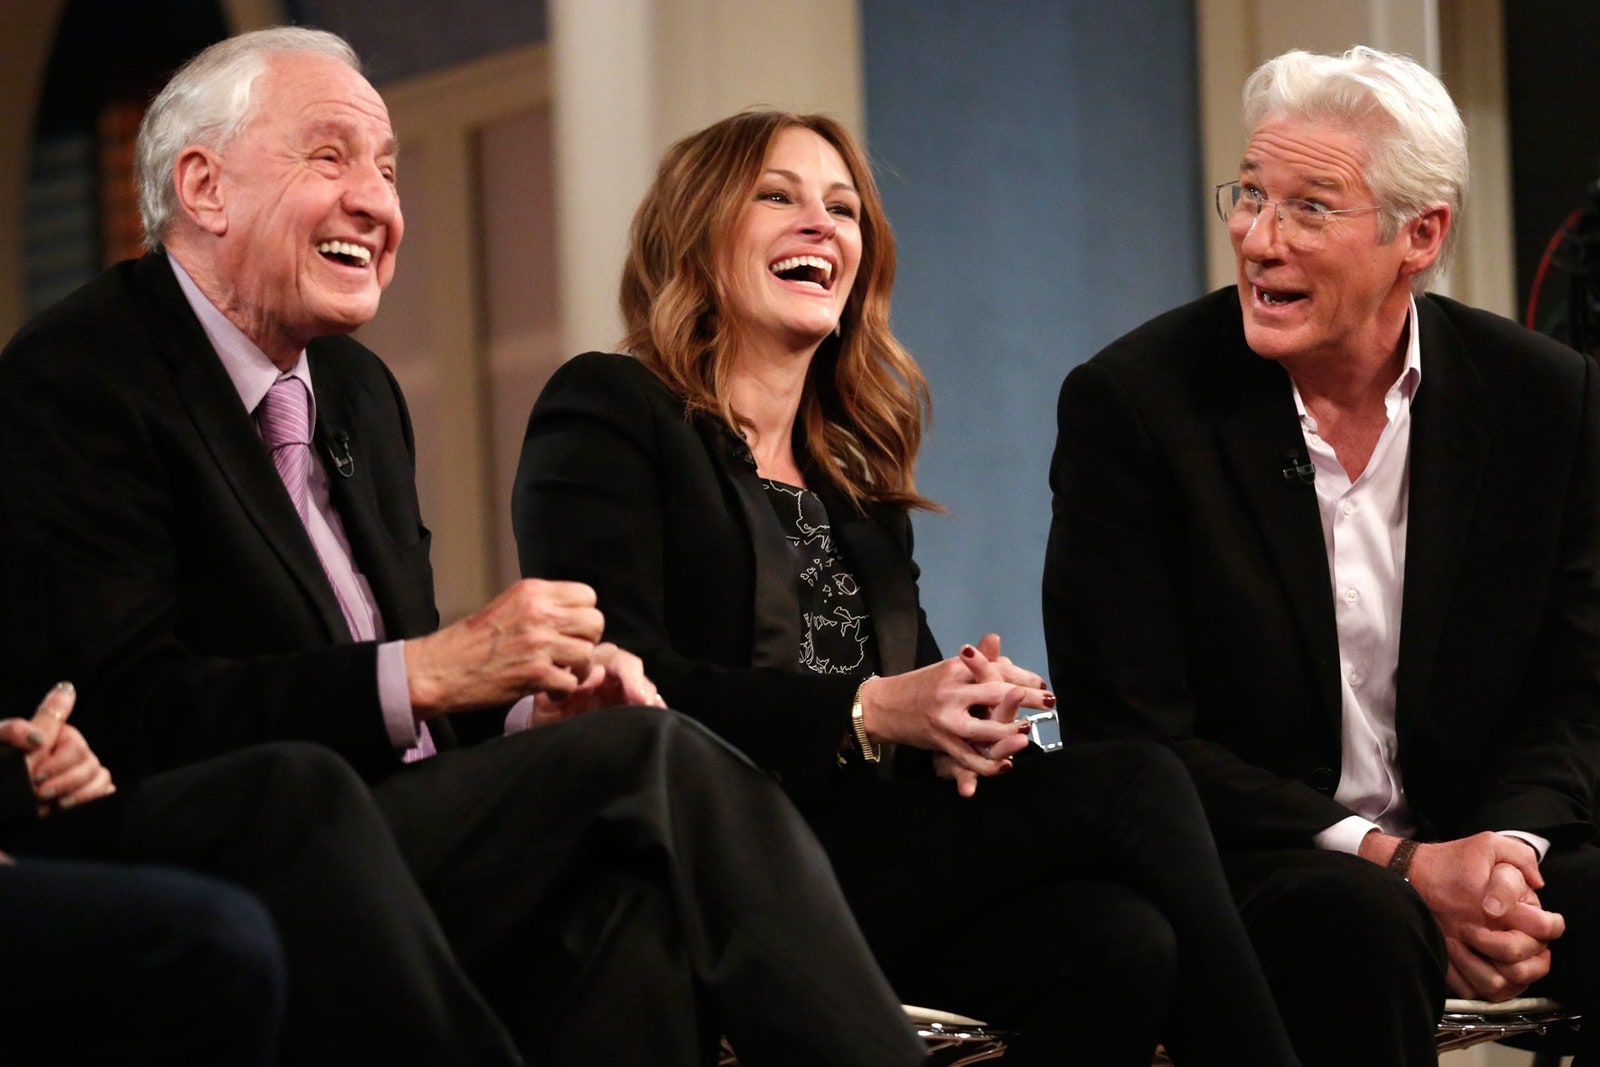 How Old Is Pretty Woman Julia Roberts And Richard Gere On Today Show